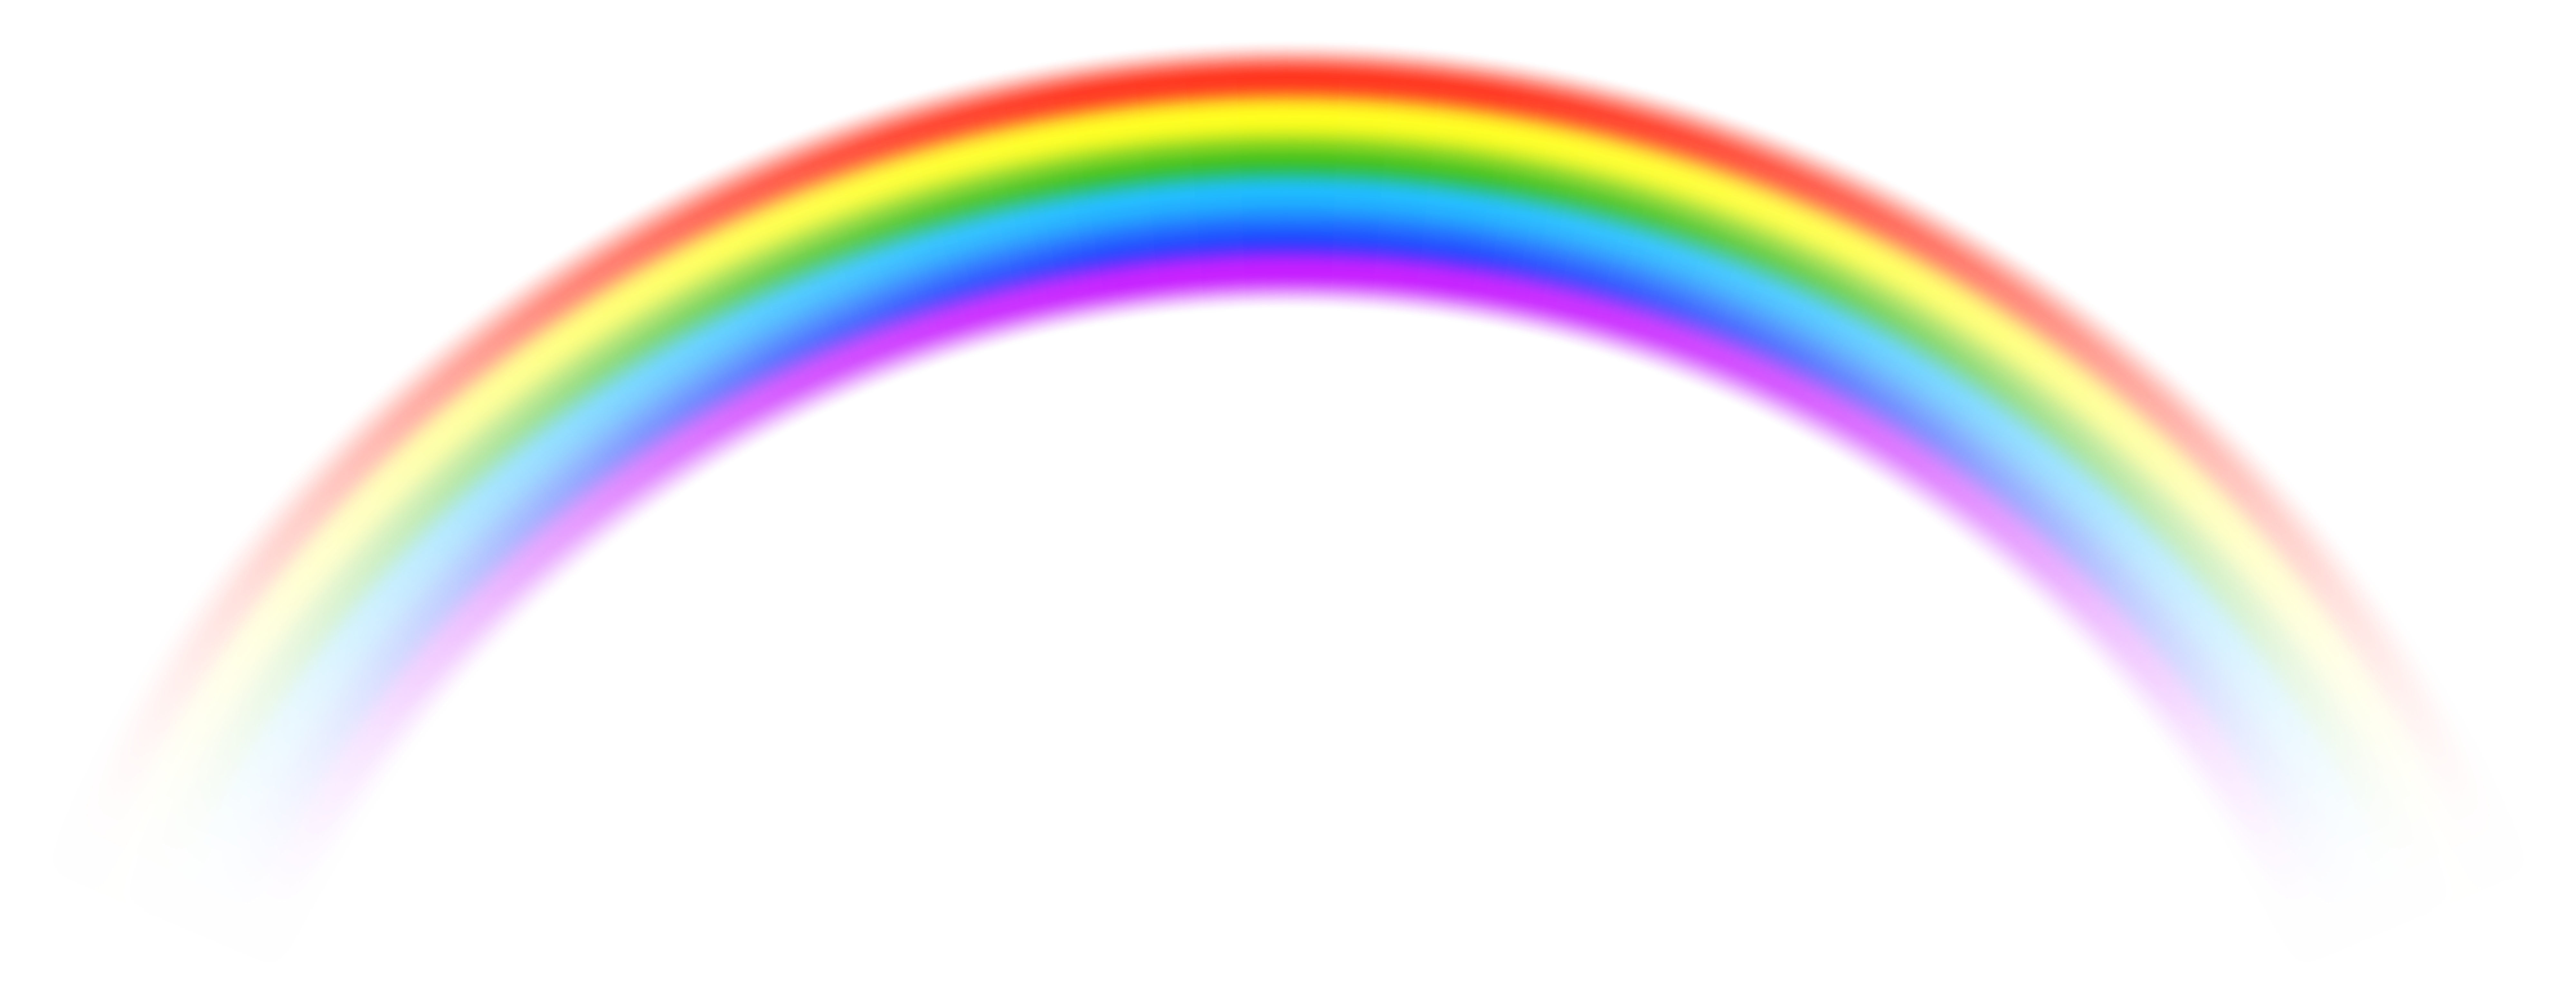 Transparent Rainbow PNG Free Clip Art Image​ | Gallery Yopriceville -  High-Quality Free Images and Transparent PNG Clipart